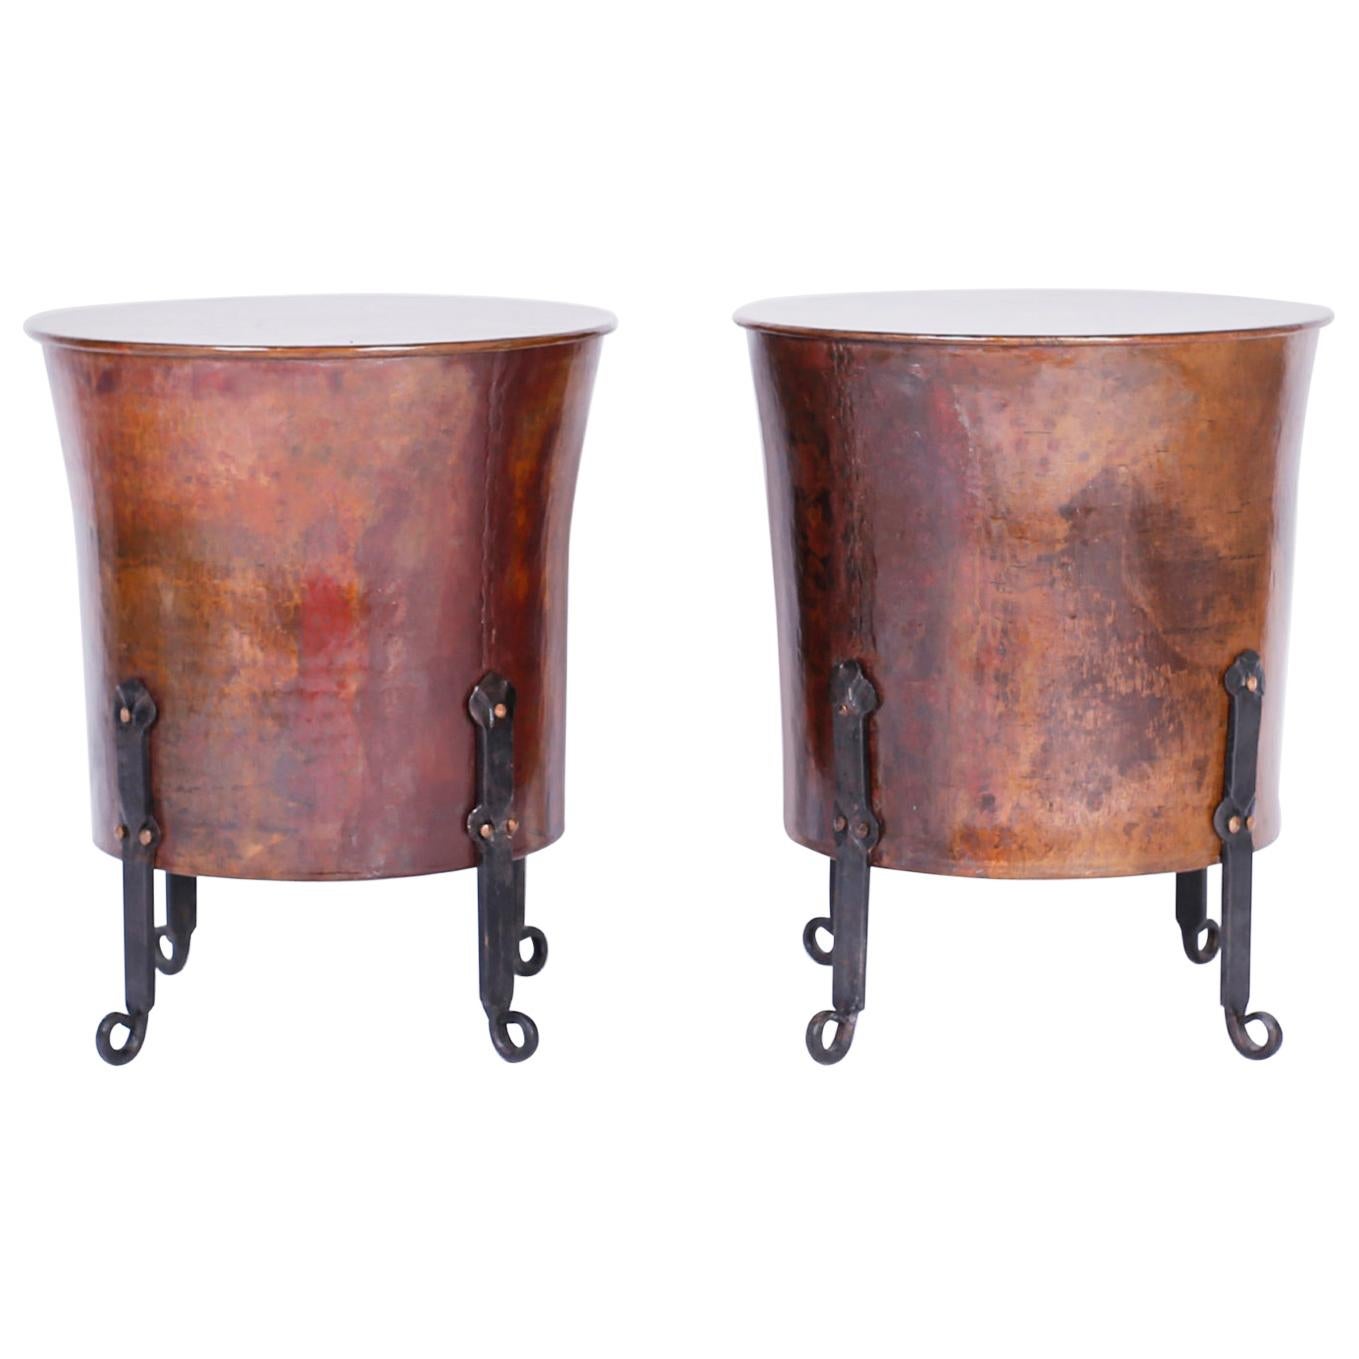 Pair of Antique French Copper and Iron End Tables